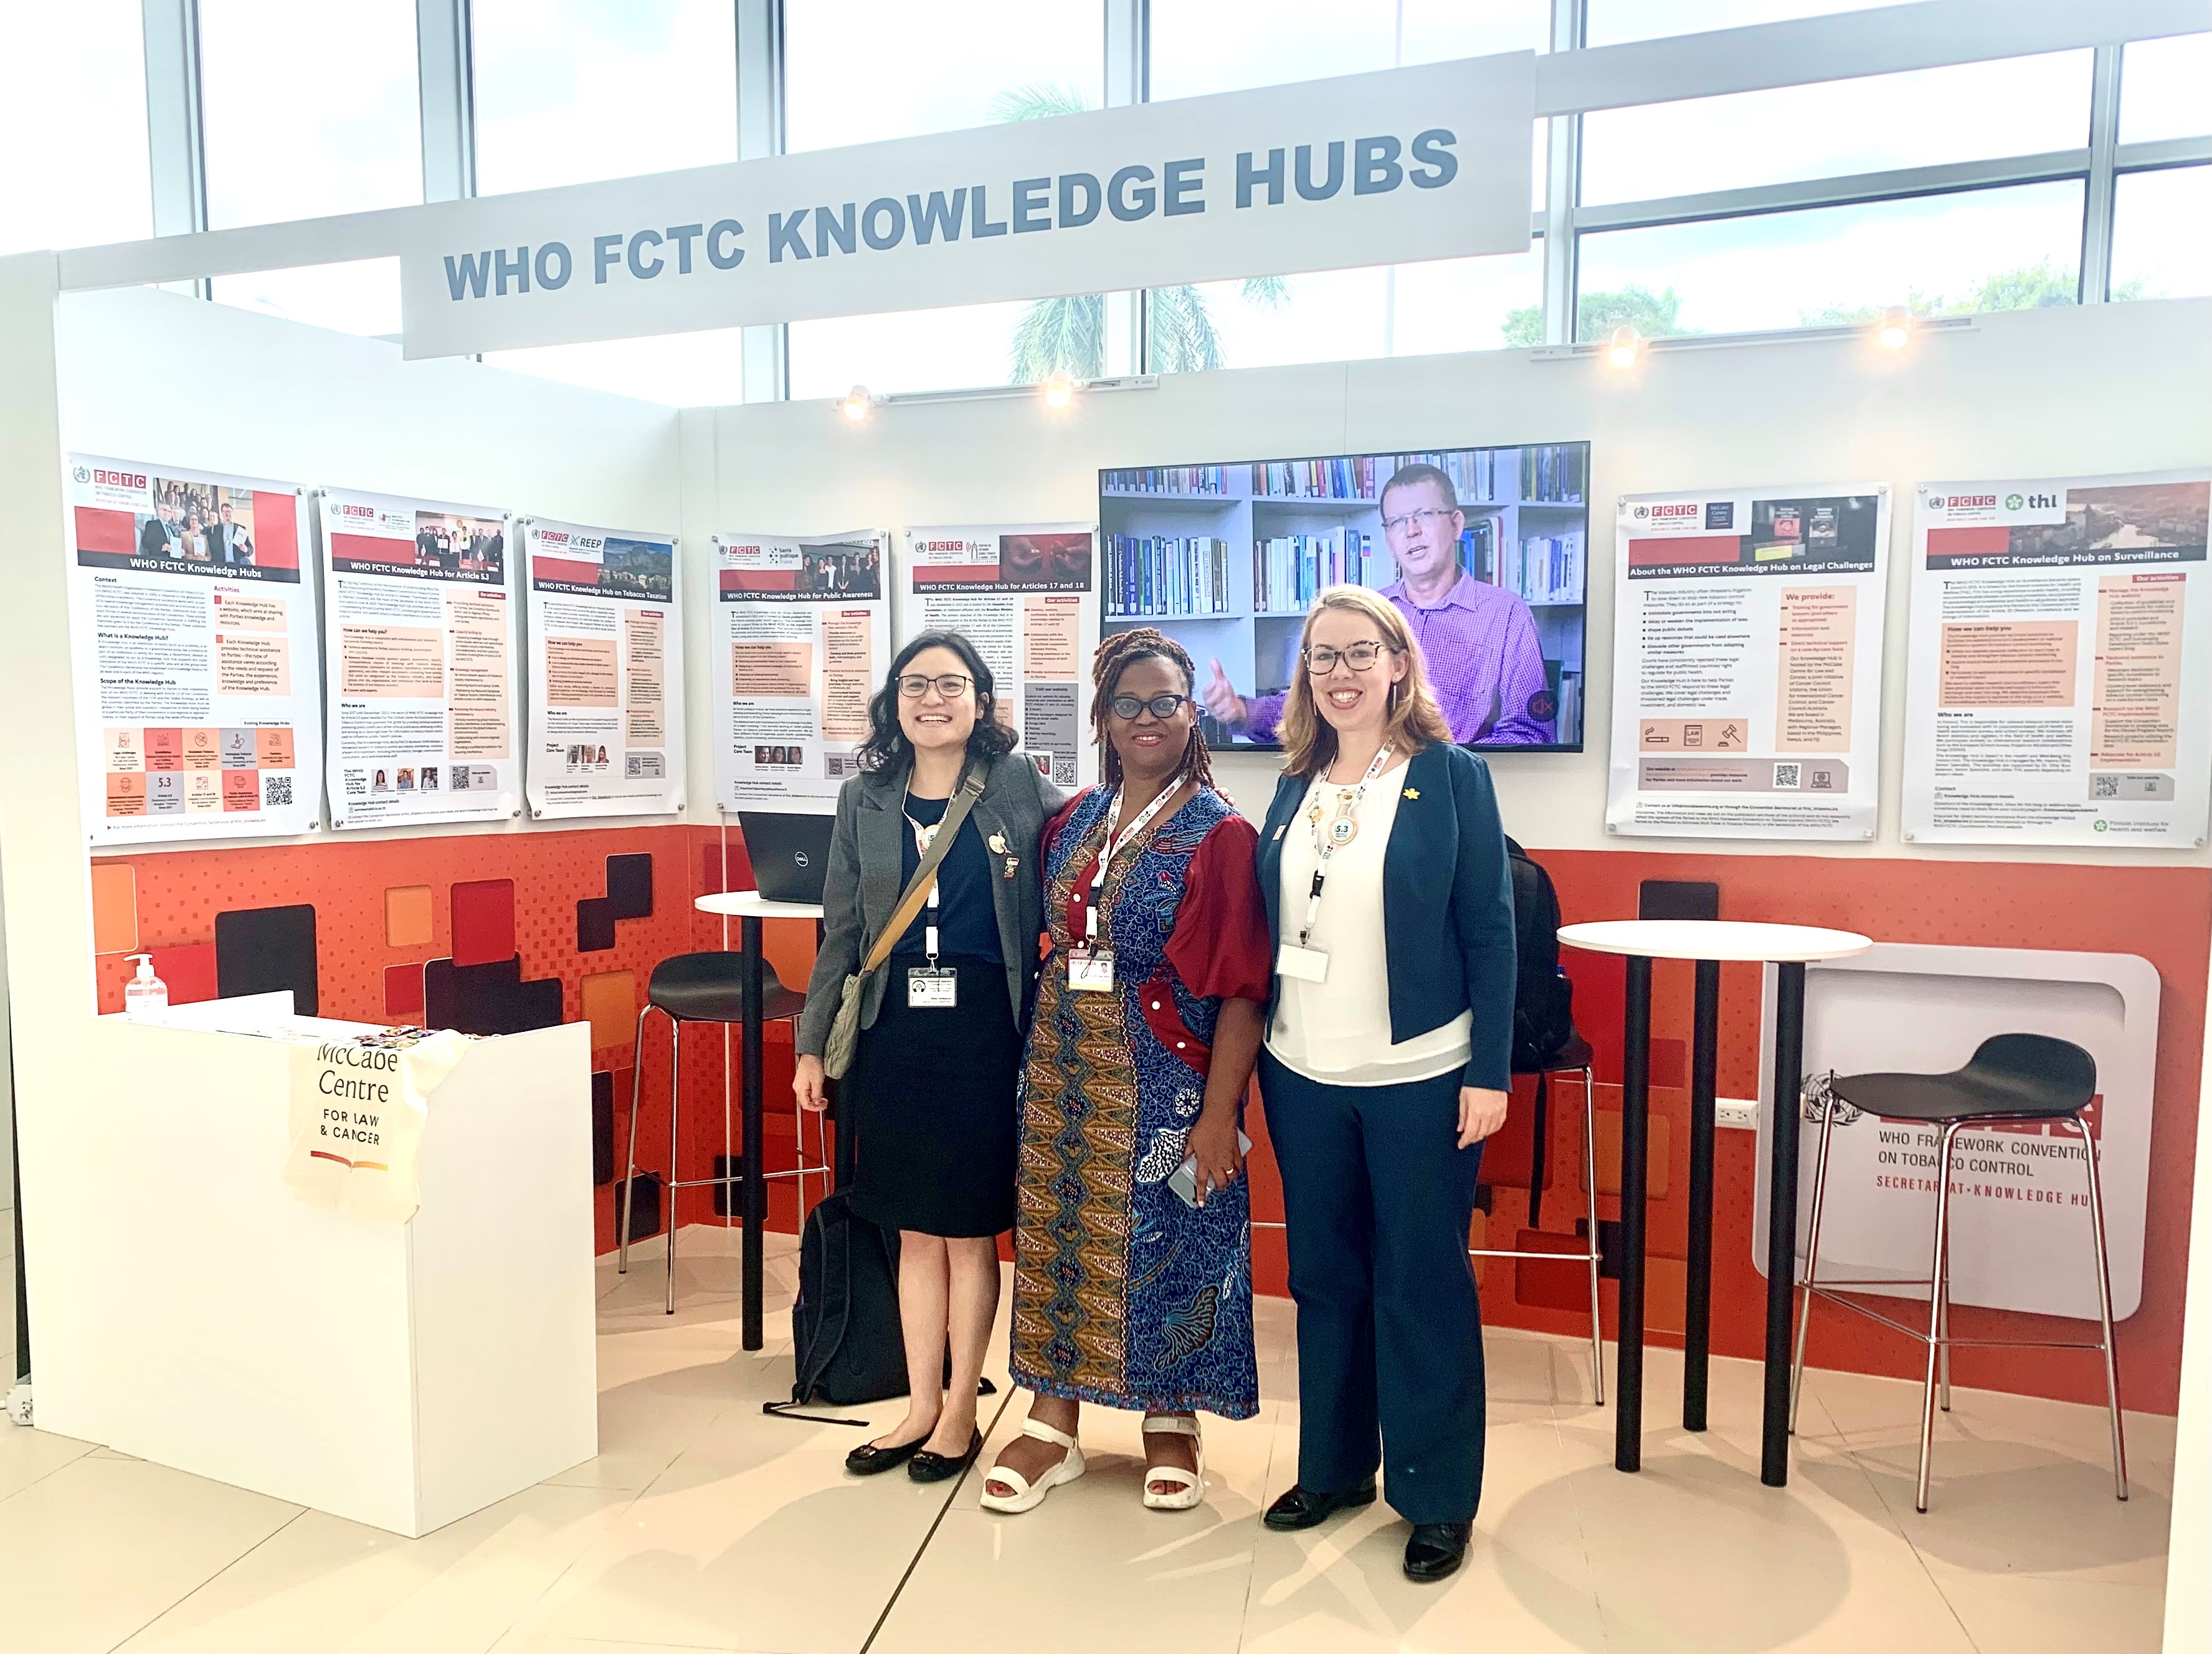 The Knowledge Hub on Legal Challenges team at the Knowledge Hub booth at COP11 Panama City